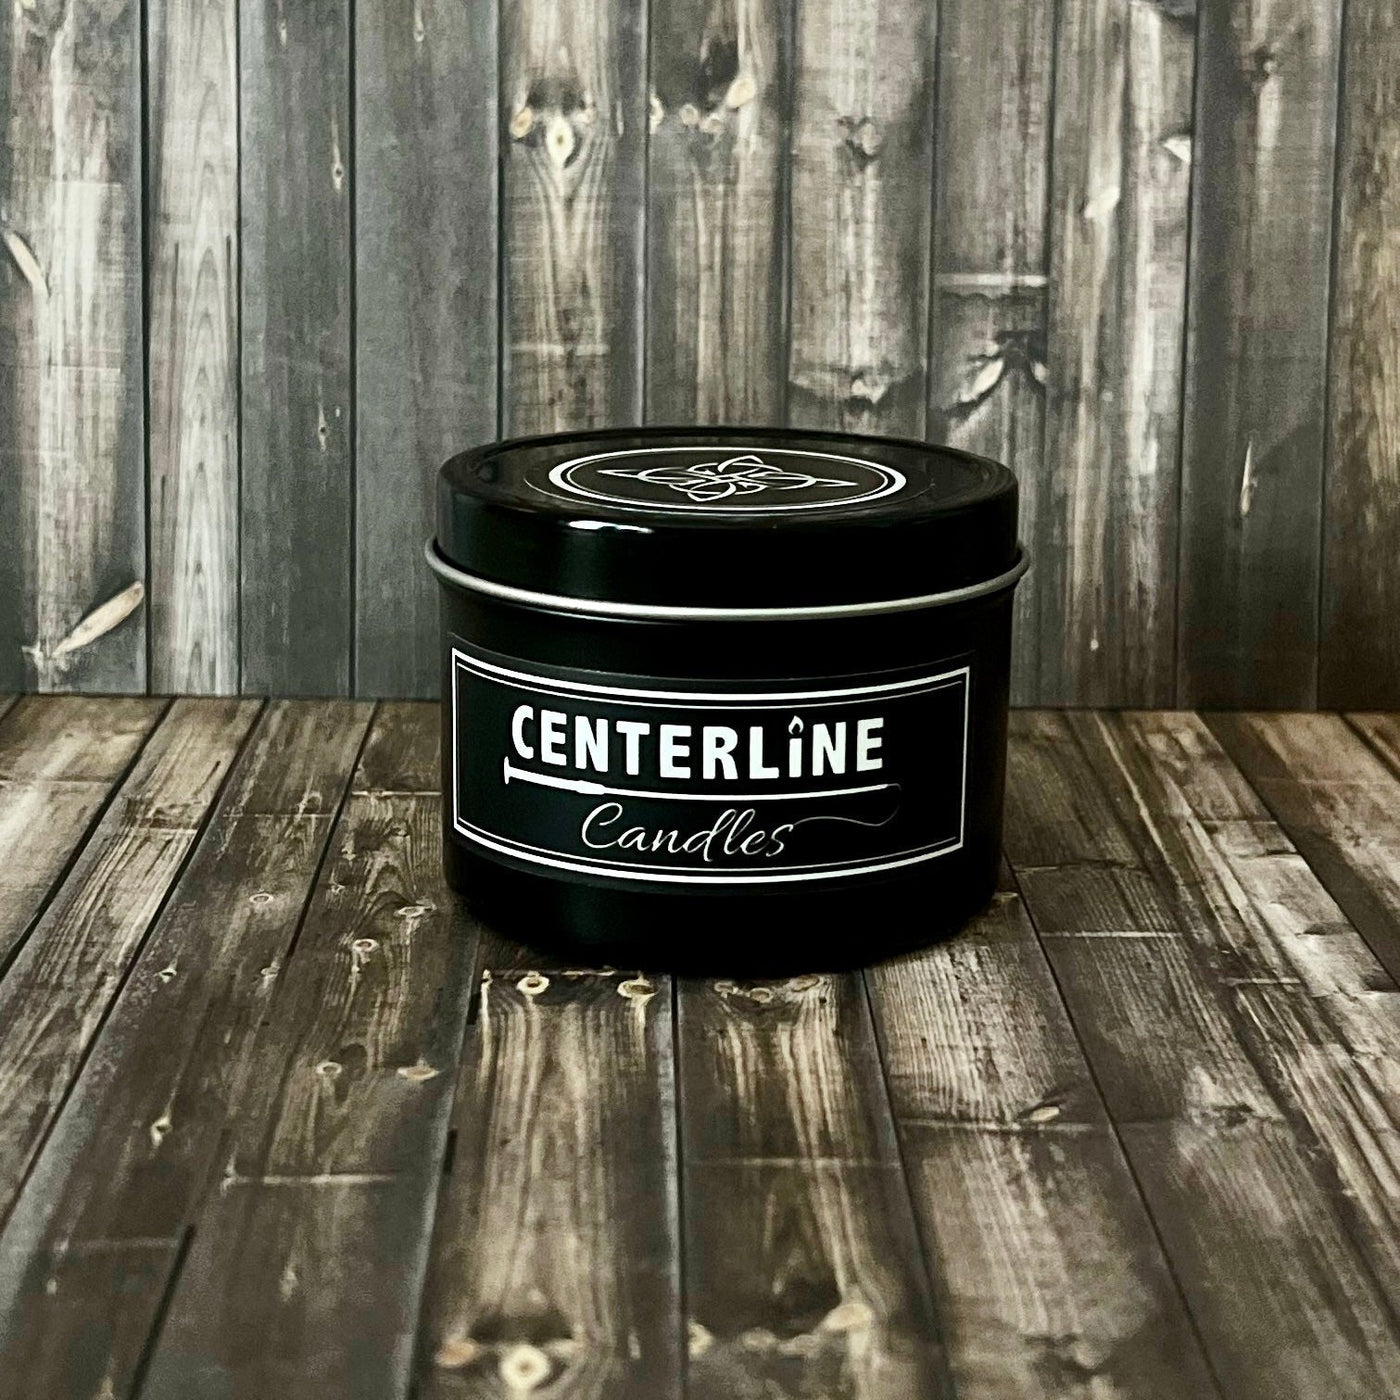 Green Apple by Centerline Candles